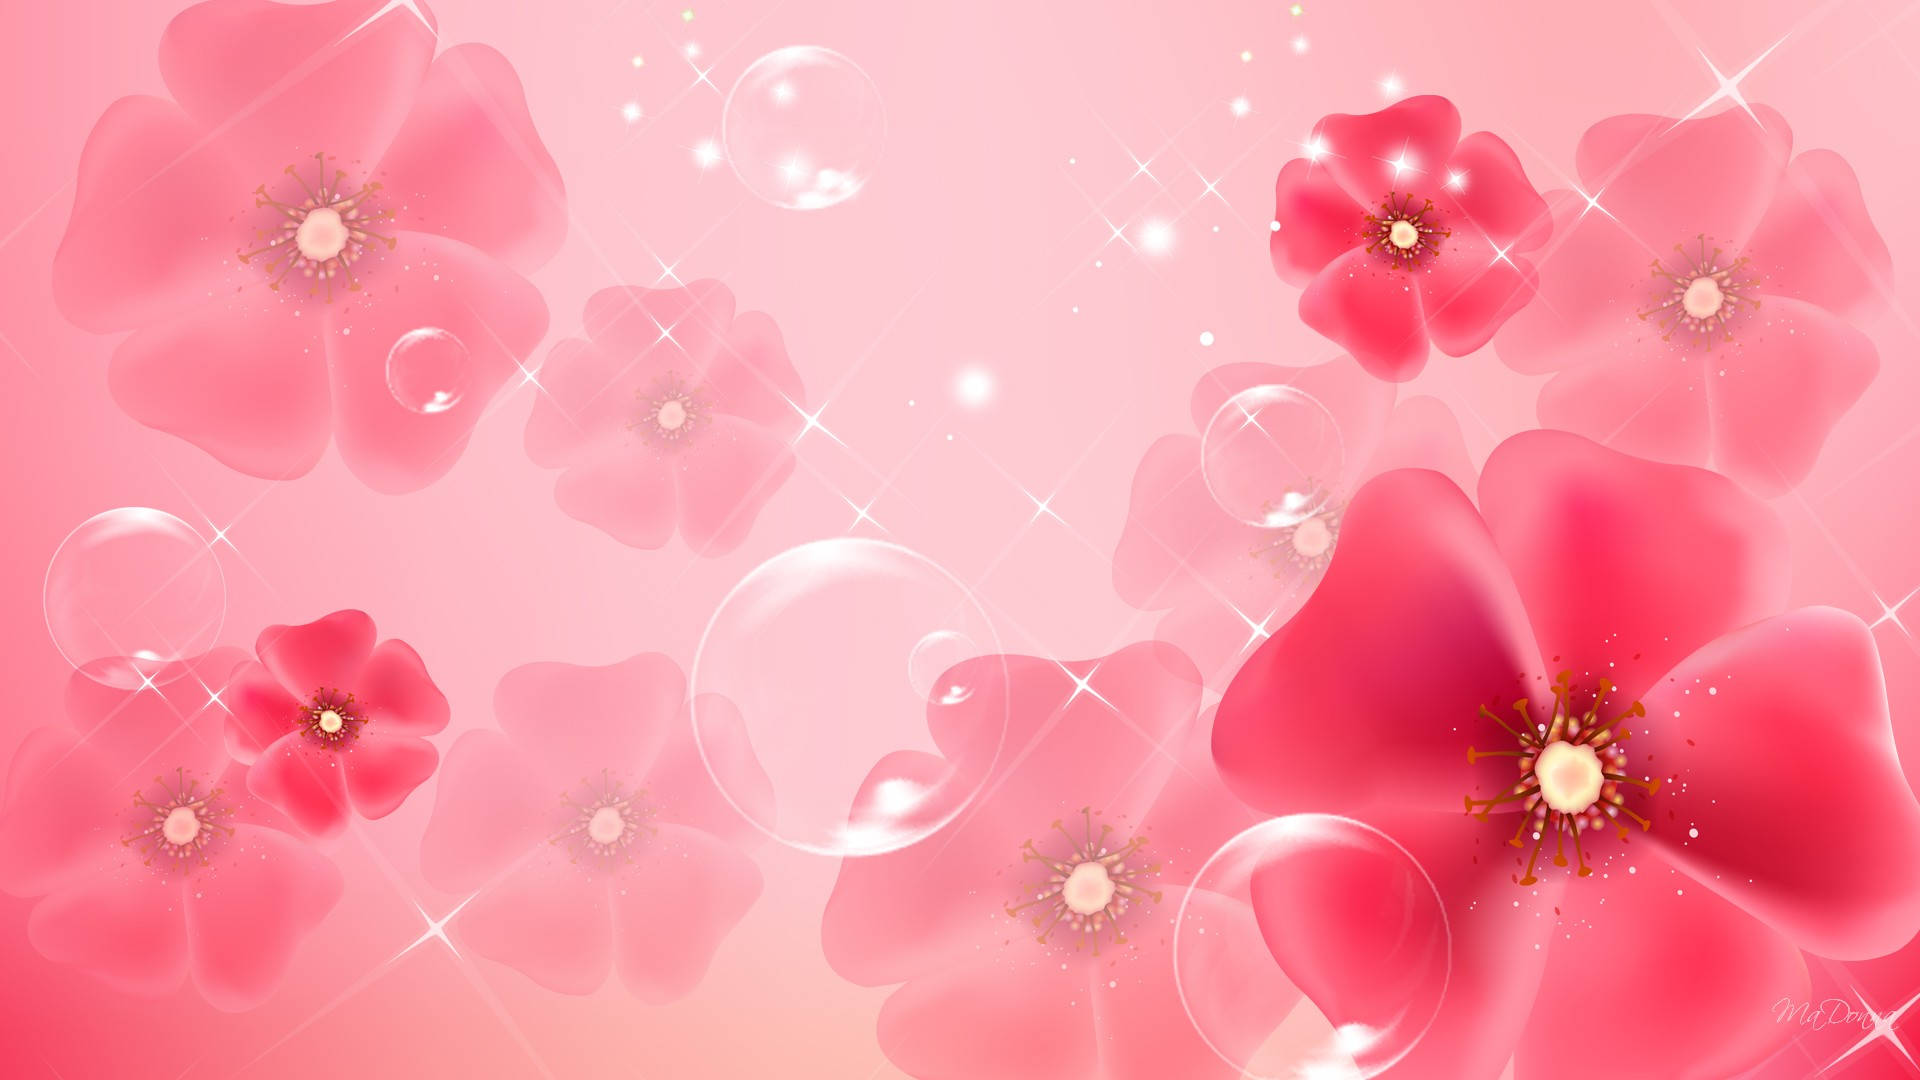 Bubbles And Flowers Background Wallpaper